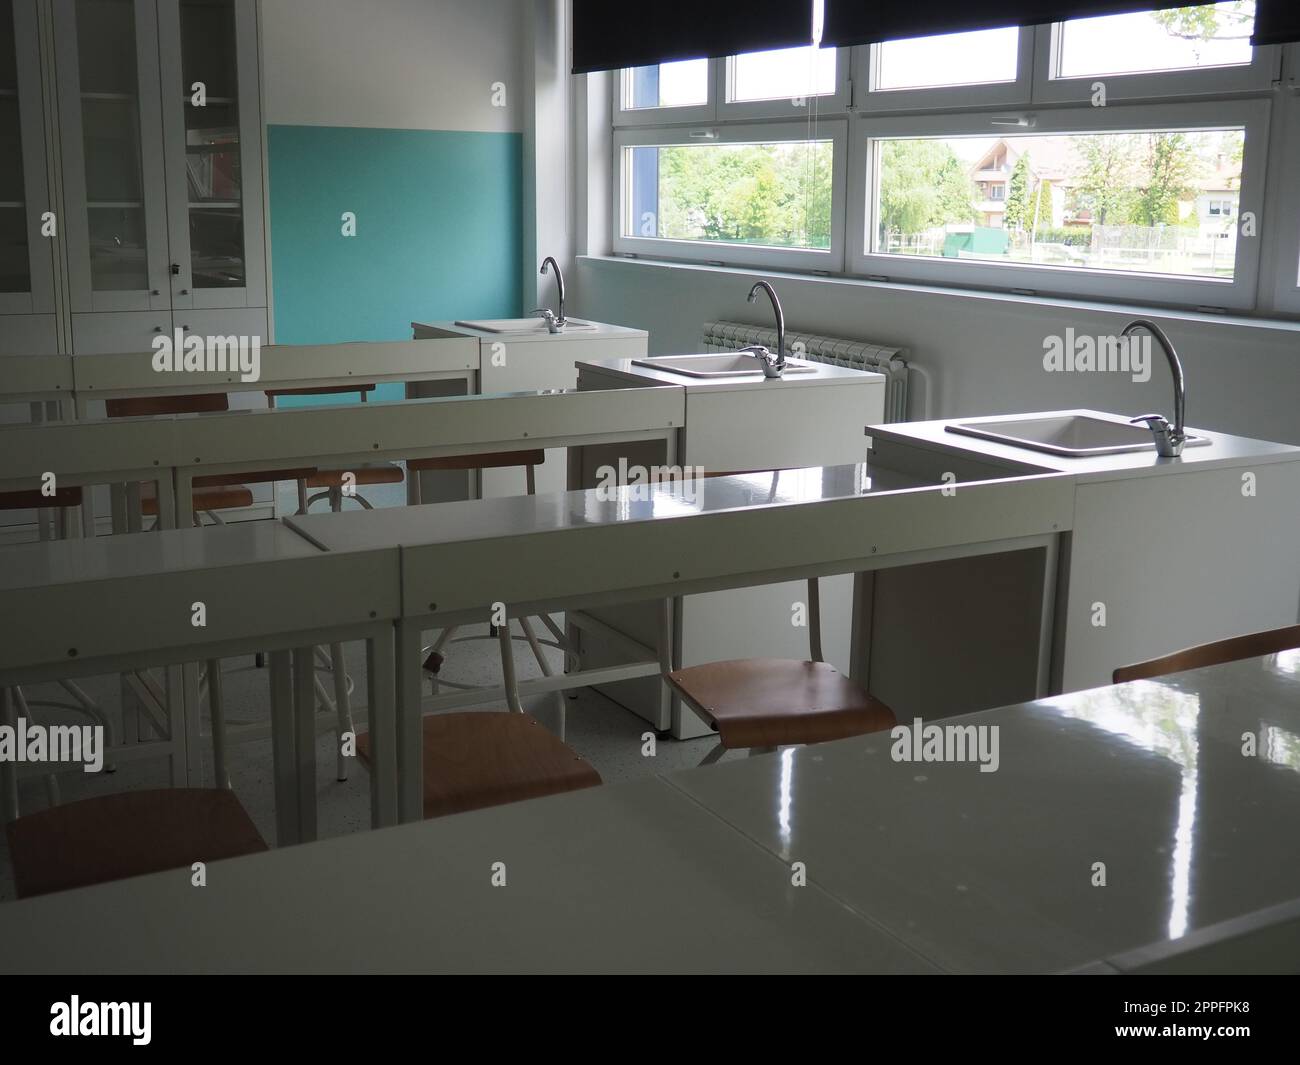 Chemistry room in a modern new school. Beautiful white furniture with sinks and washbasins. Large windows with blackout curtains or blinds. Empty school classroom. Furniture and school equipment Stock Photo